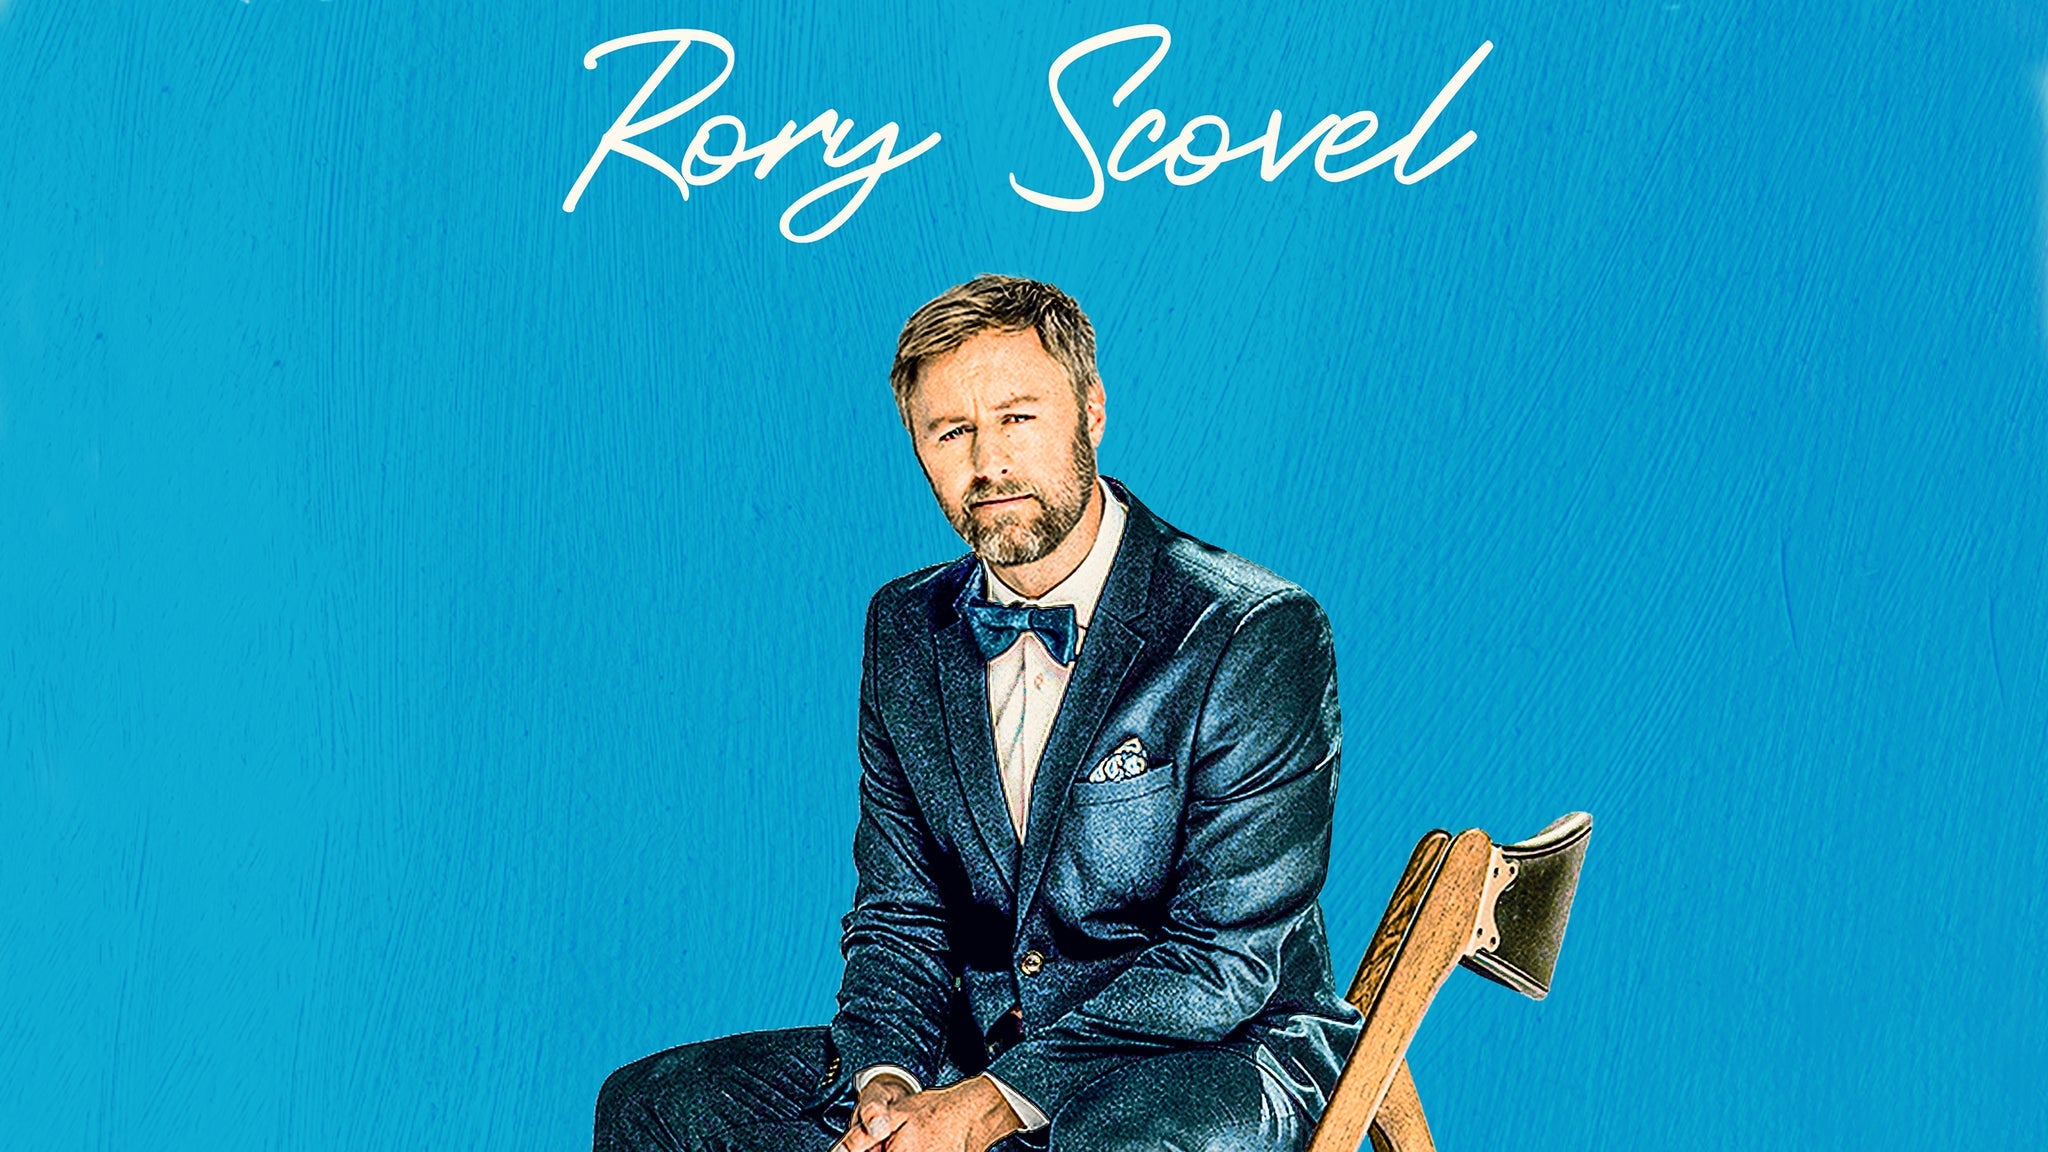 exclusive presale password to LYAO Presents: Rory Scovel advanced tickets in Charlottesville